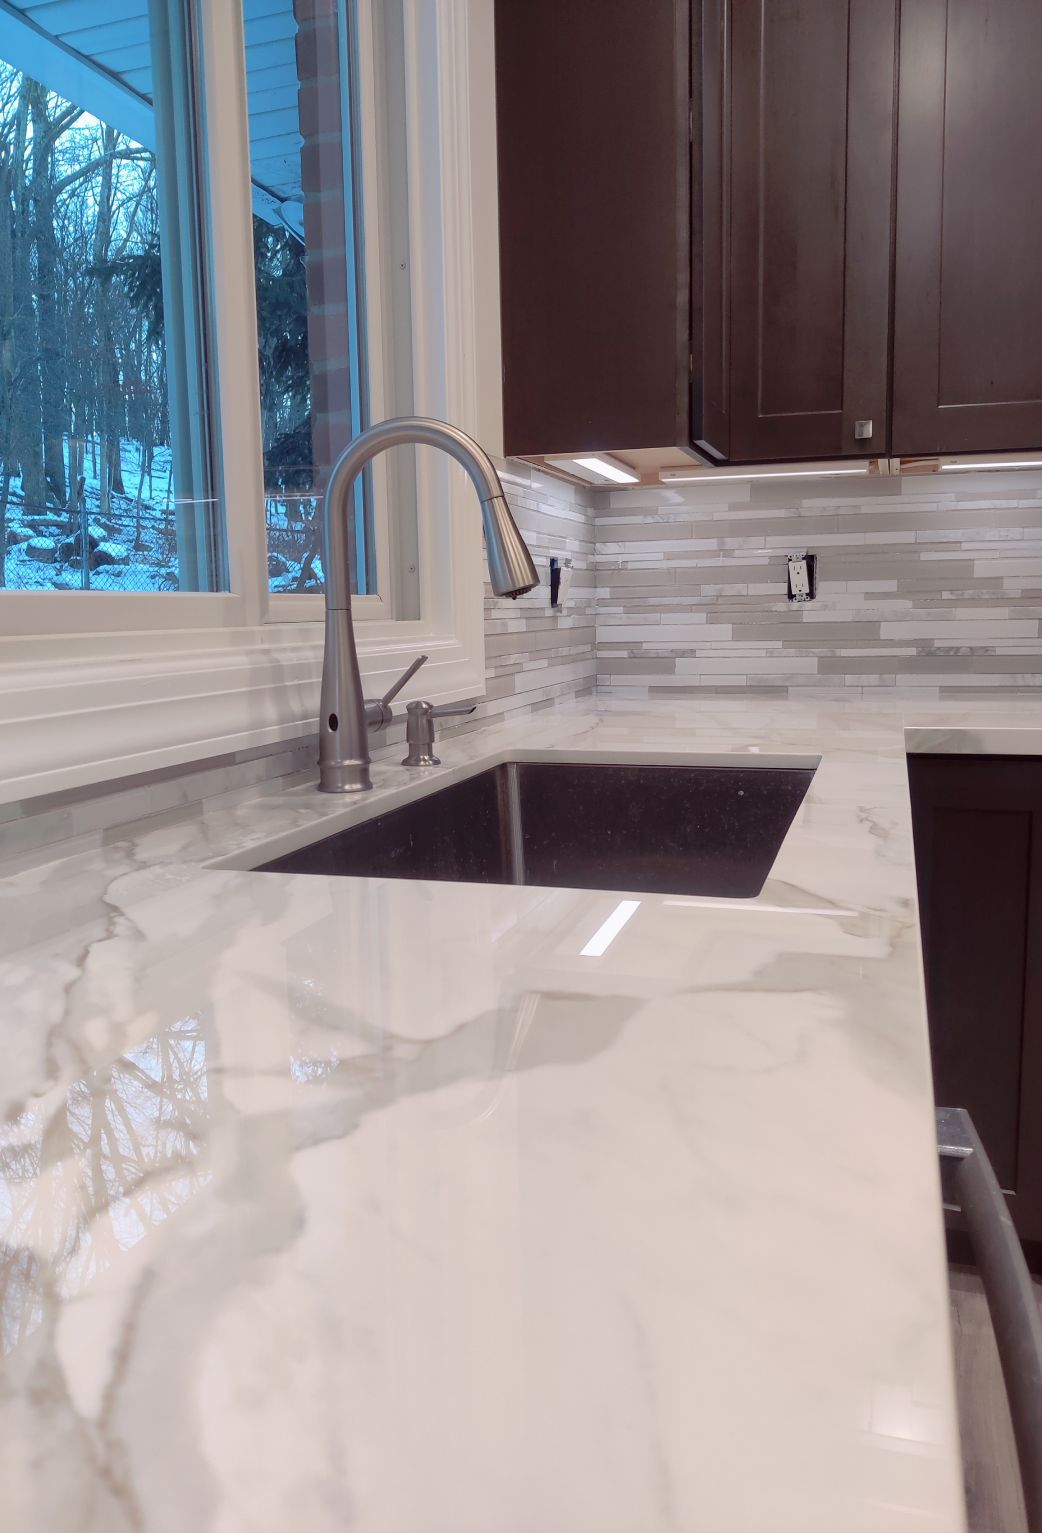 Elegant kitchen sink area remodeled by True Built Construction, showcasing a deep, undermount sink with a high-arc faucet, set against a luxurious marbled white countertop. The linear mosaic tile backsplash in shades of grey adds sophistication, while the window frames a serene, snowy landscape